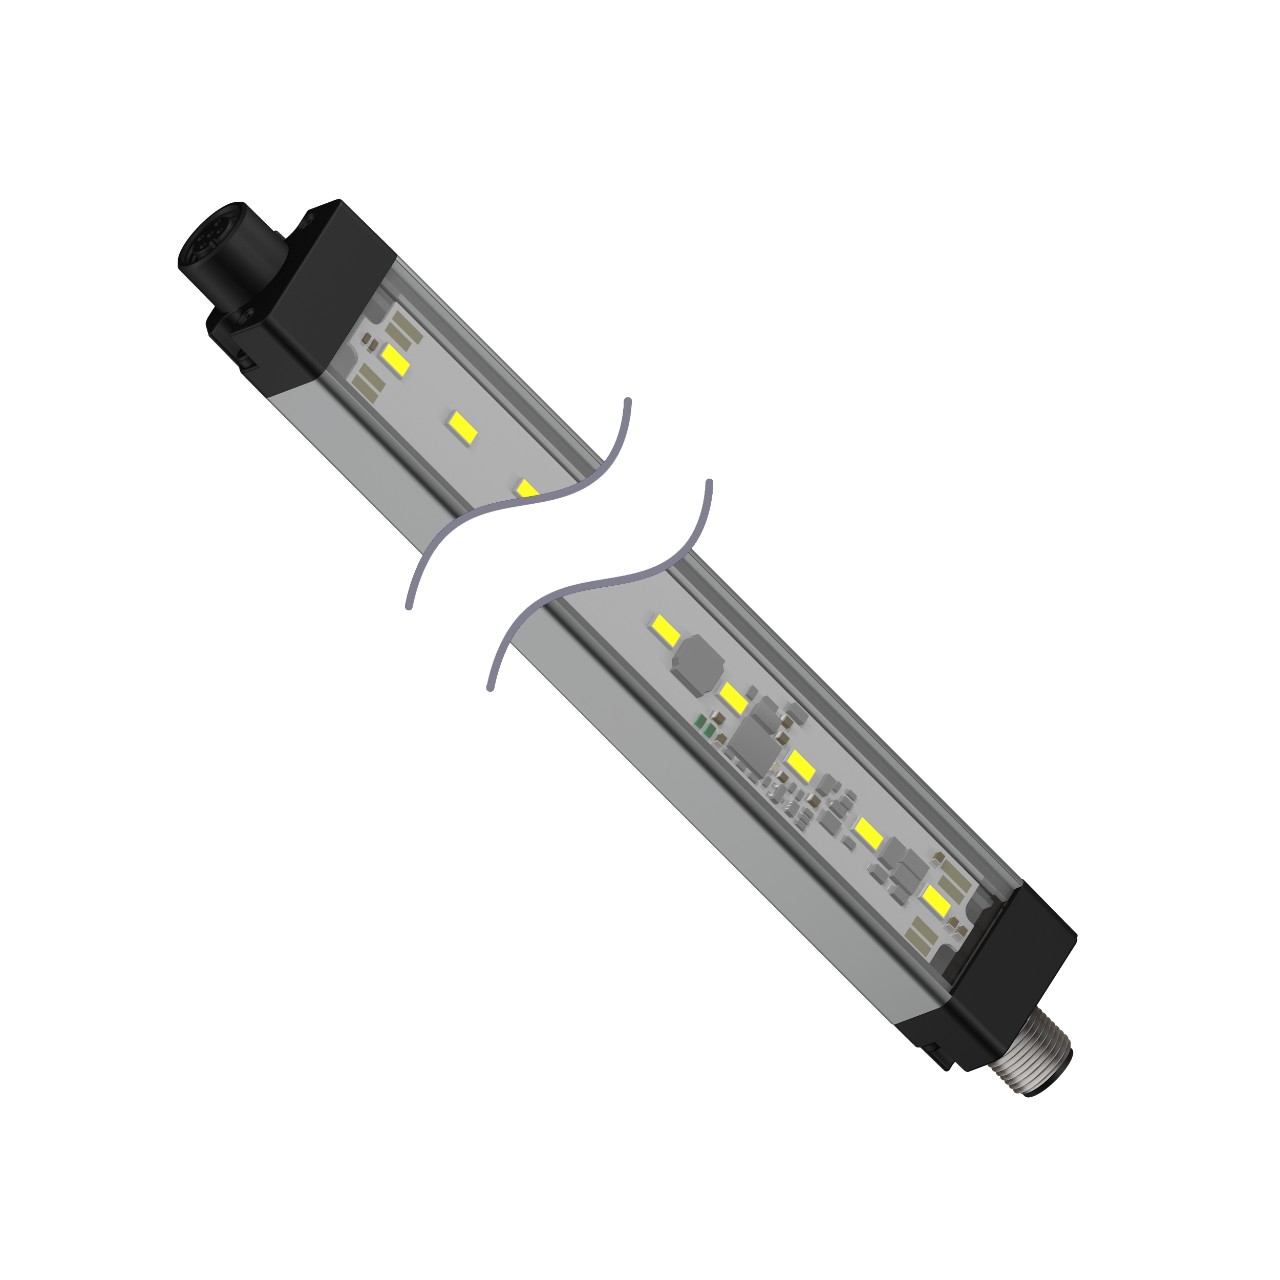 WLS28-2CW570DXQ - WLS28-2 Work Light Strip; Diffuse Window; Length: 570 mm; Voltage: 12-30 V dc; Environmental Rating: IP50; Color: White; Cascadable;